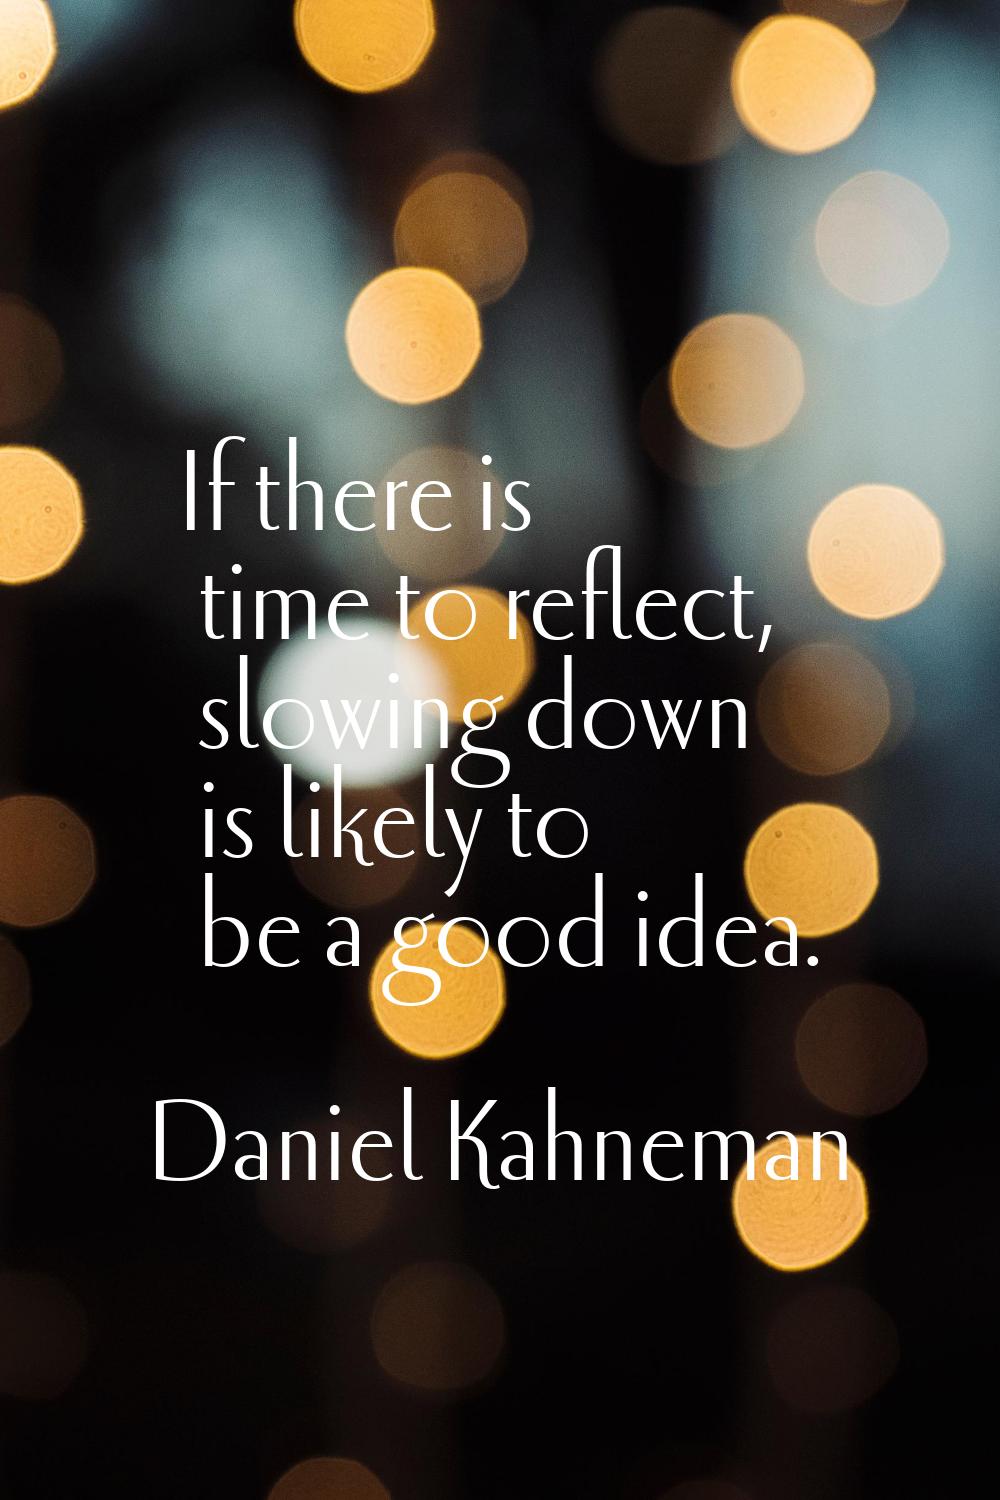 If there is time to reflect, slowing down is likely to be a good idea.